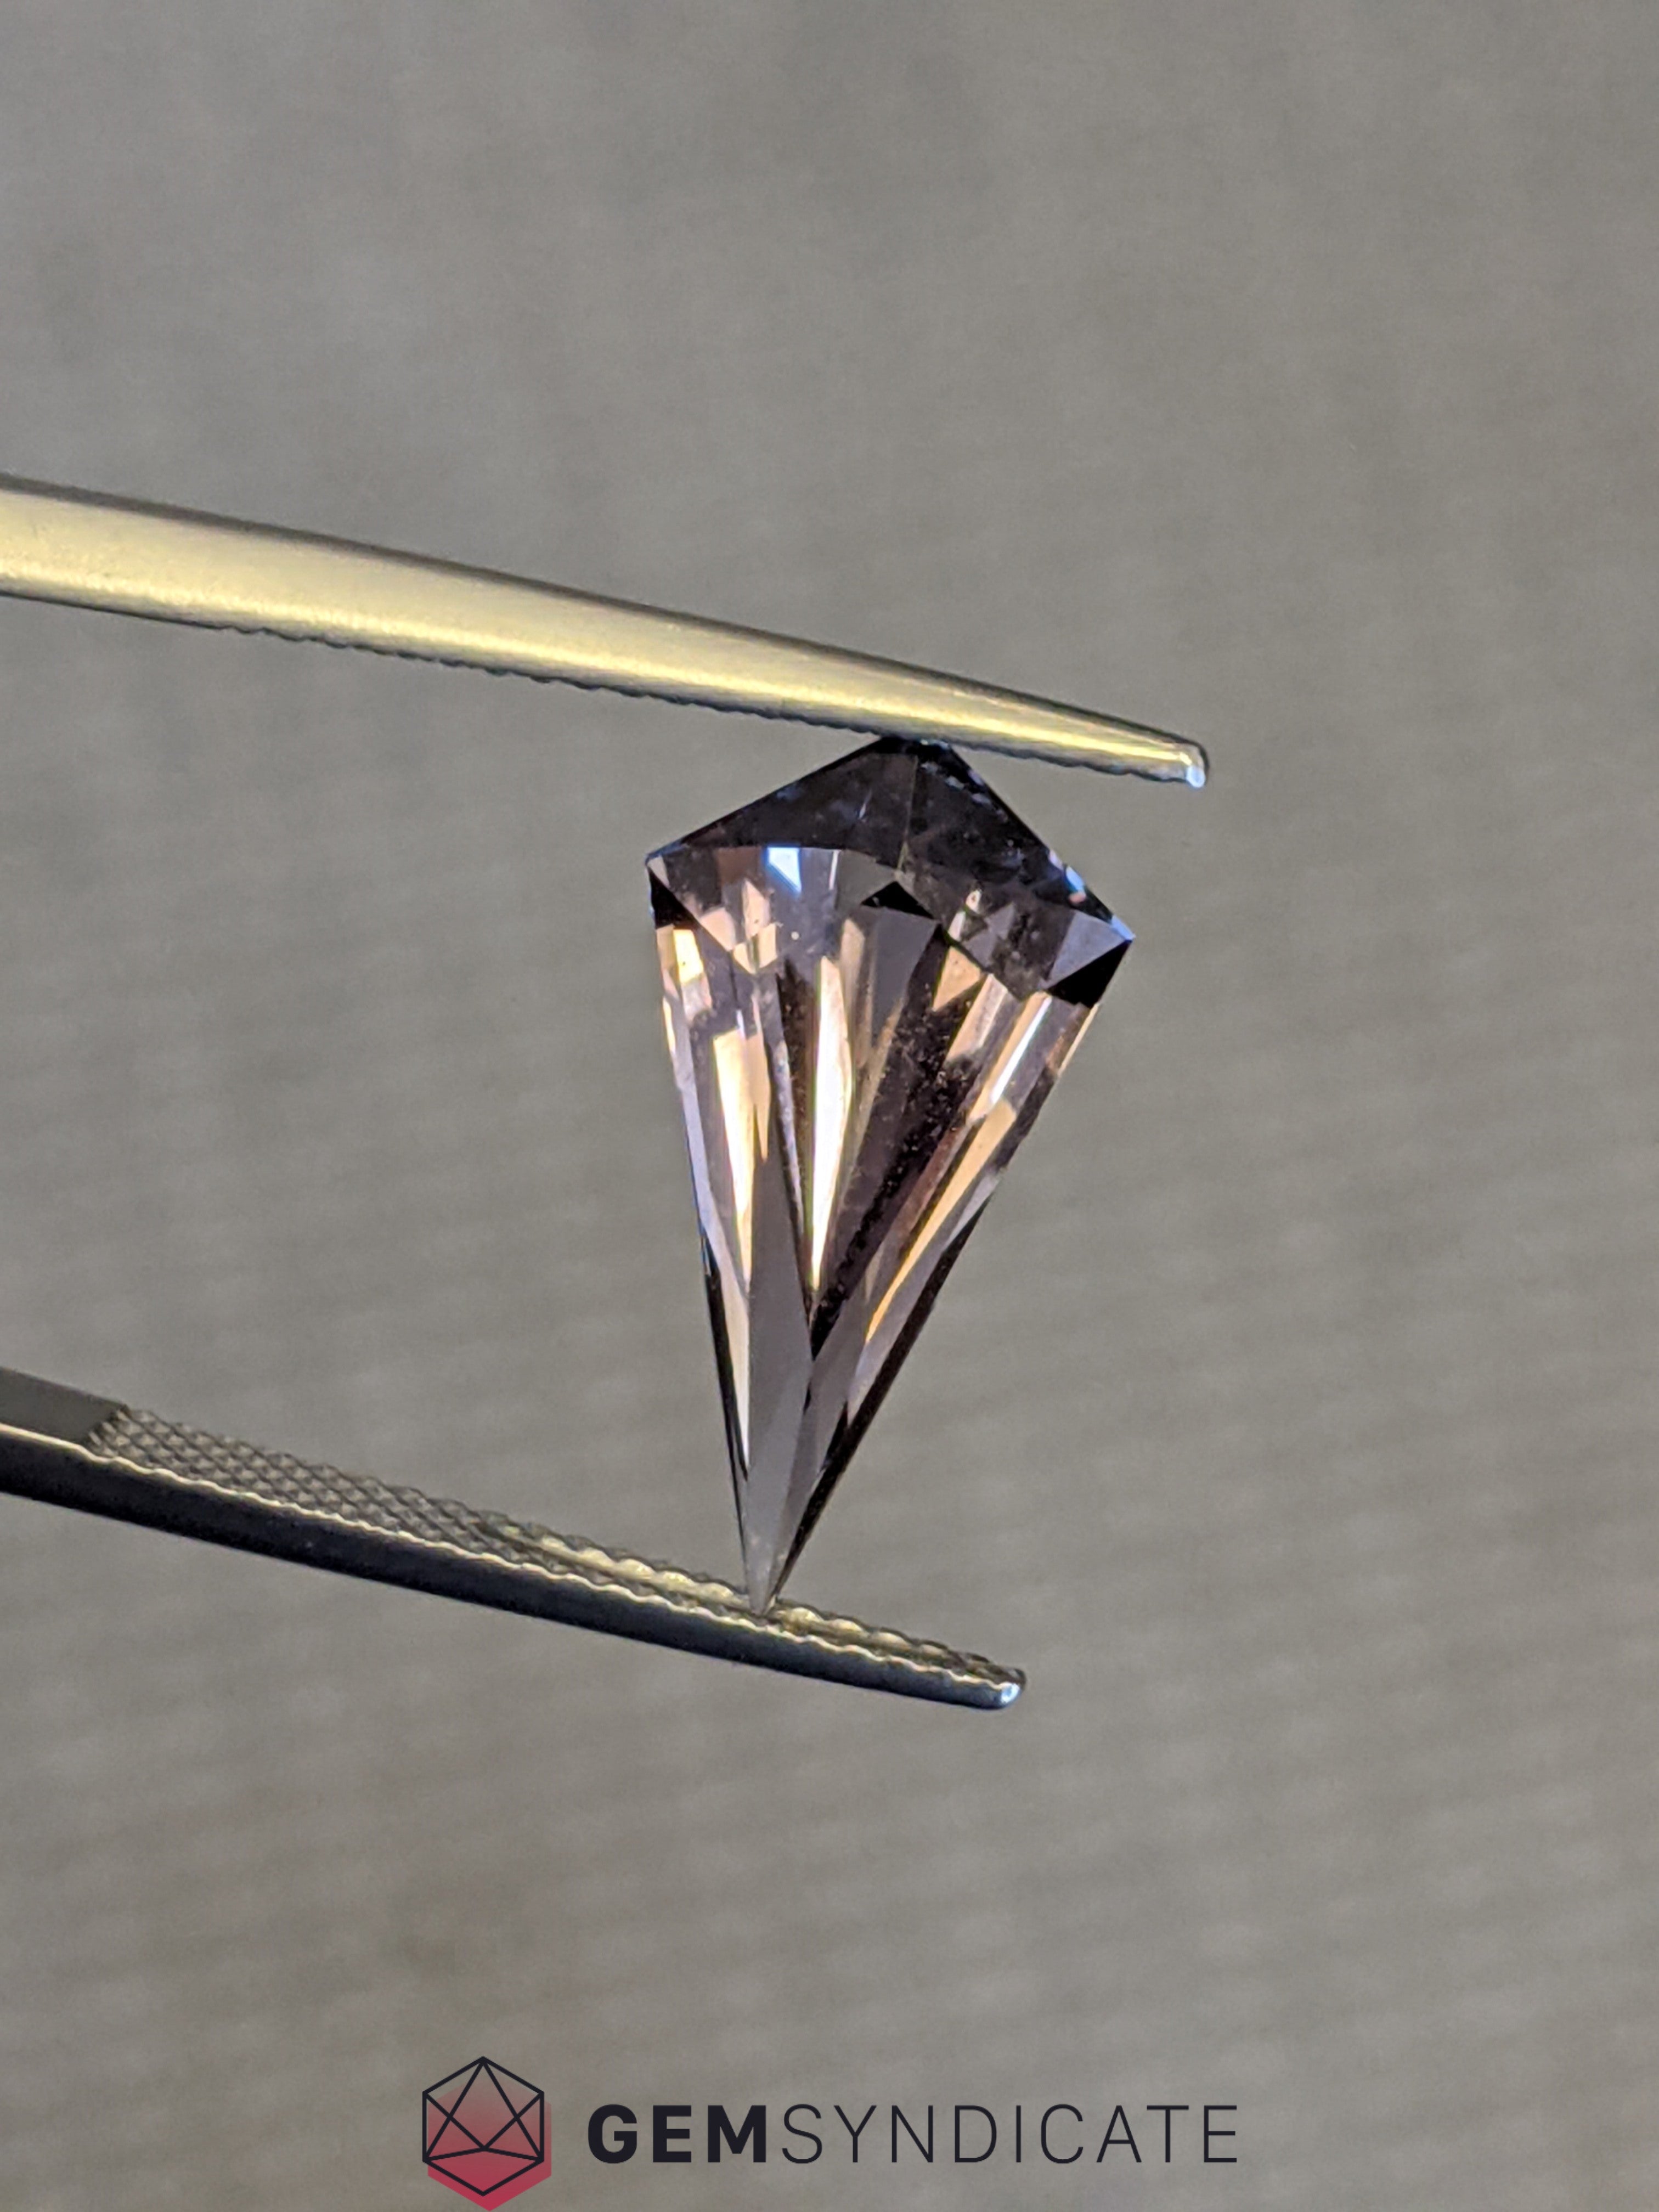 Outstanding Kite Shape Grey Spinel 4.08ct